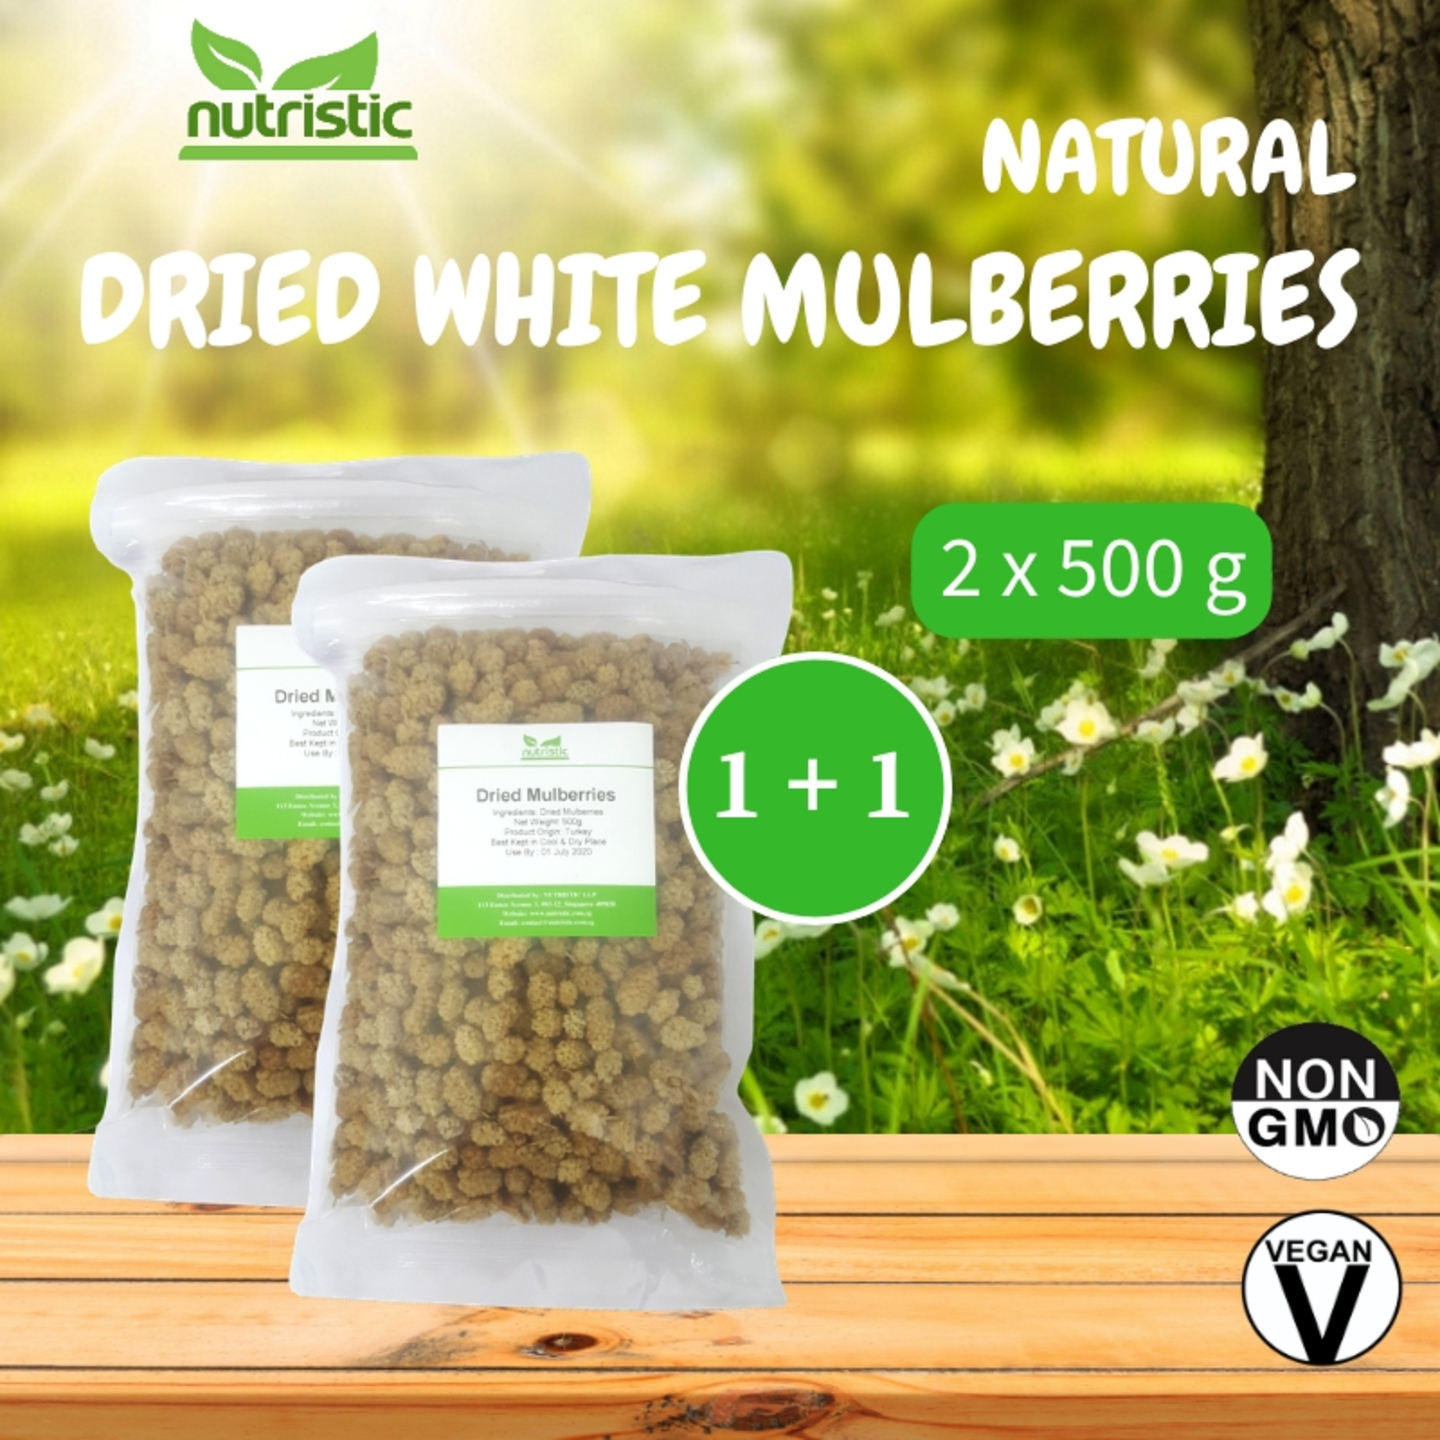 Natural Dried White Mulberries x2 - Value Bundle 1+1